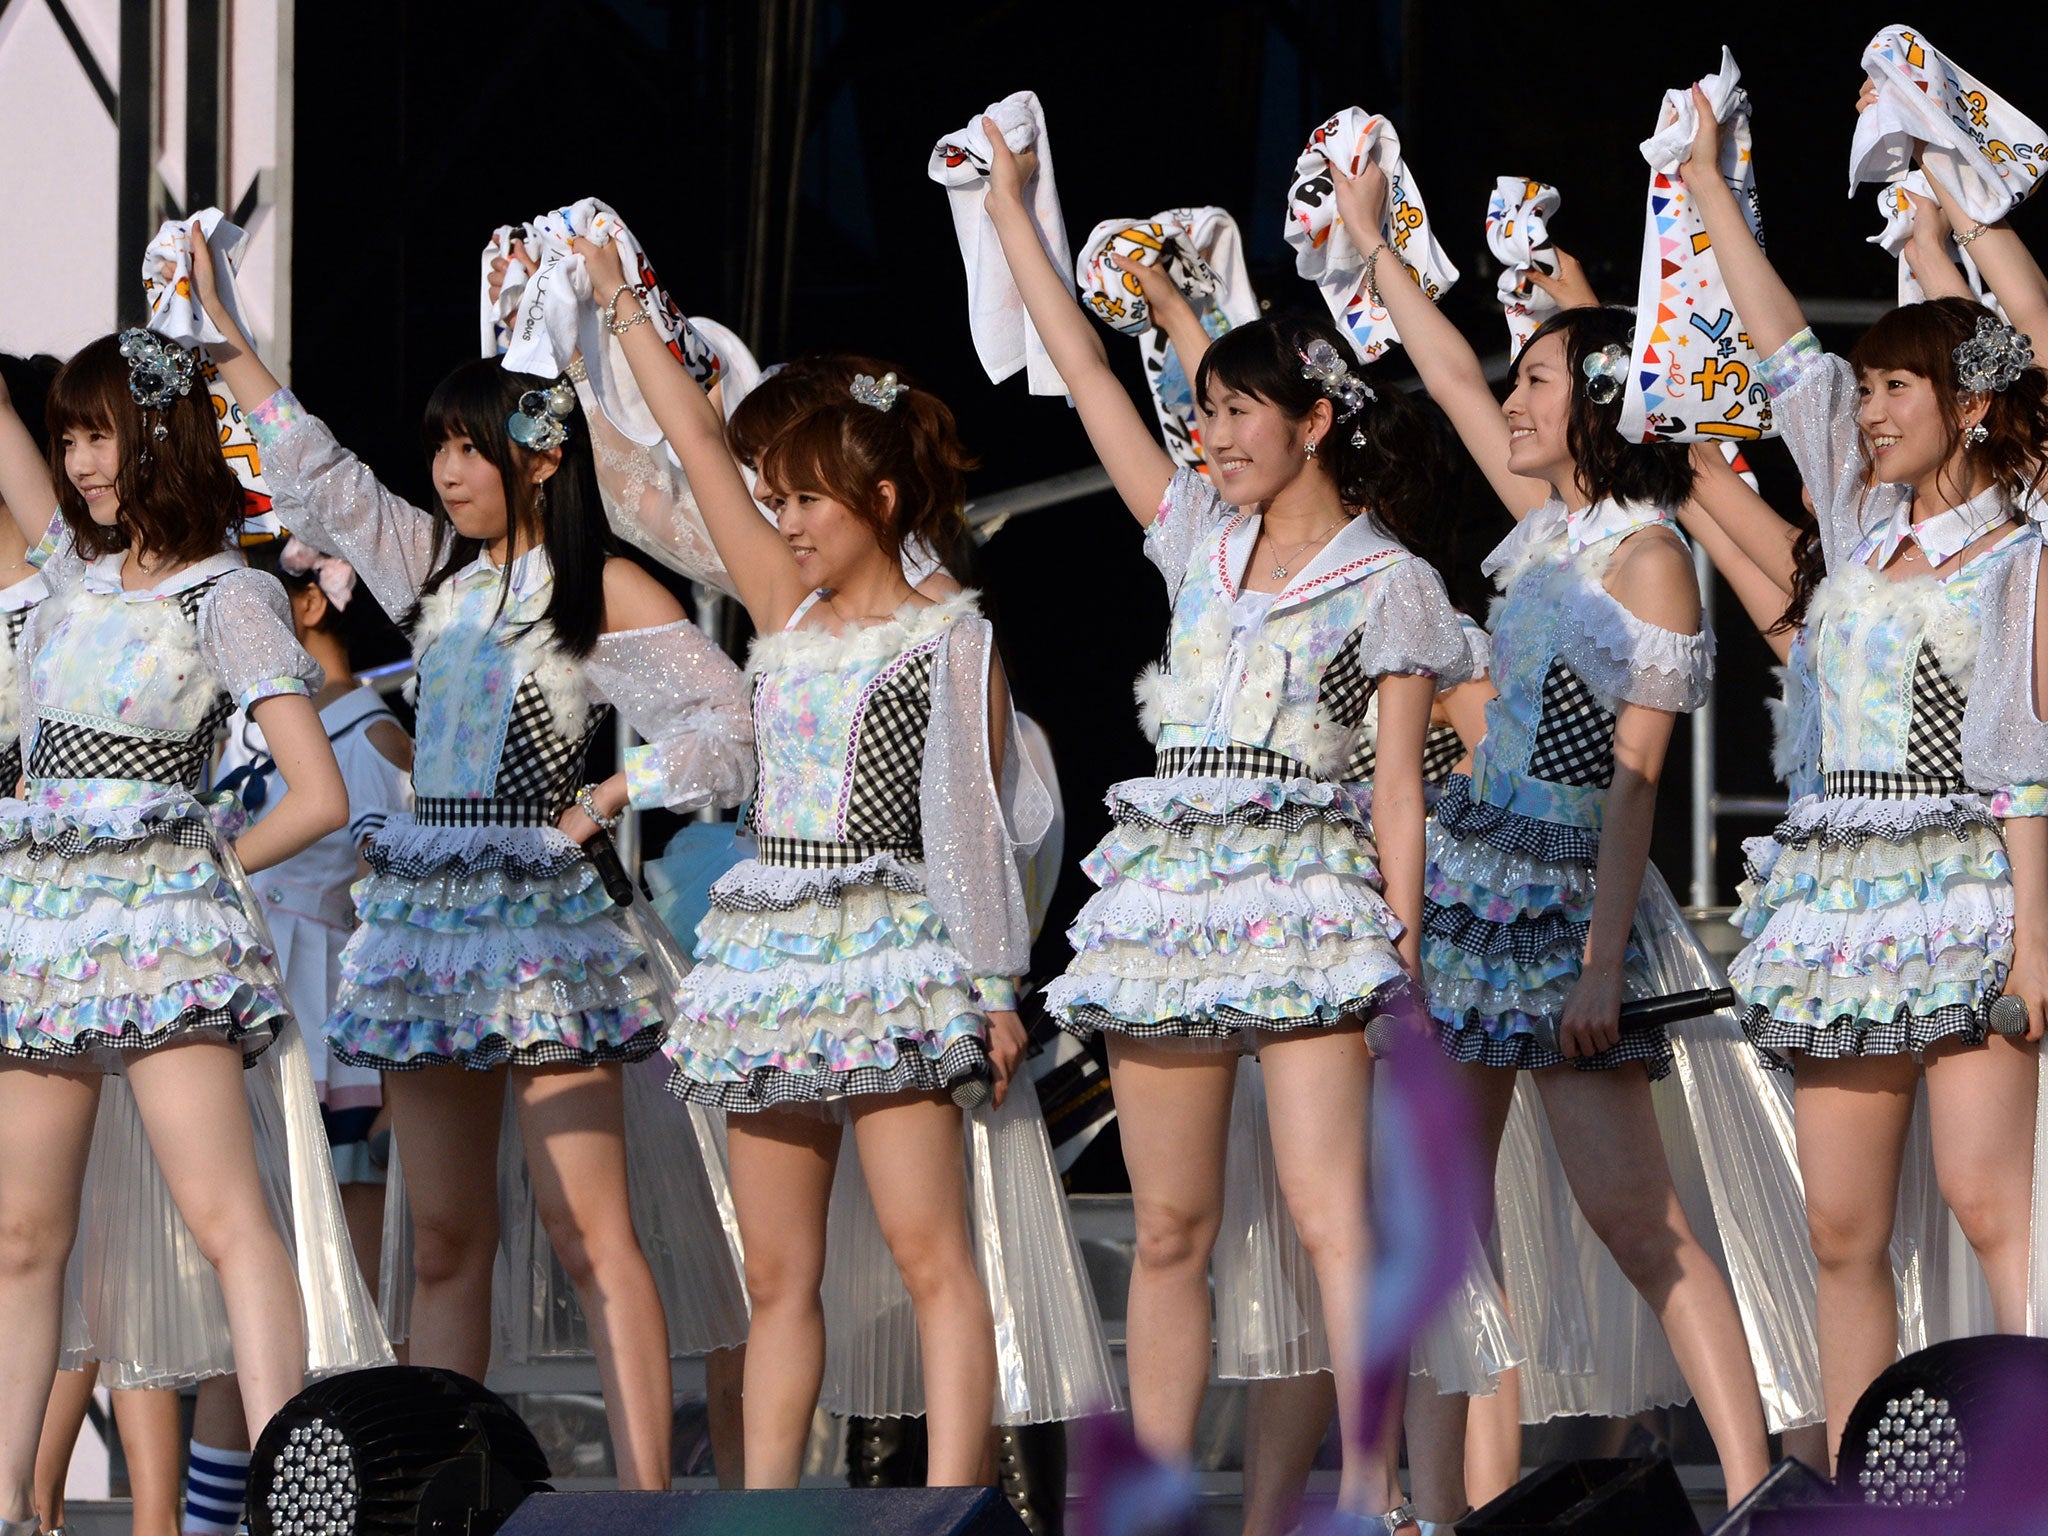 Japanese girl pop group AKB48m, whose members were attacked last year